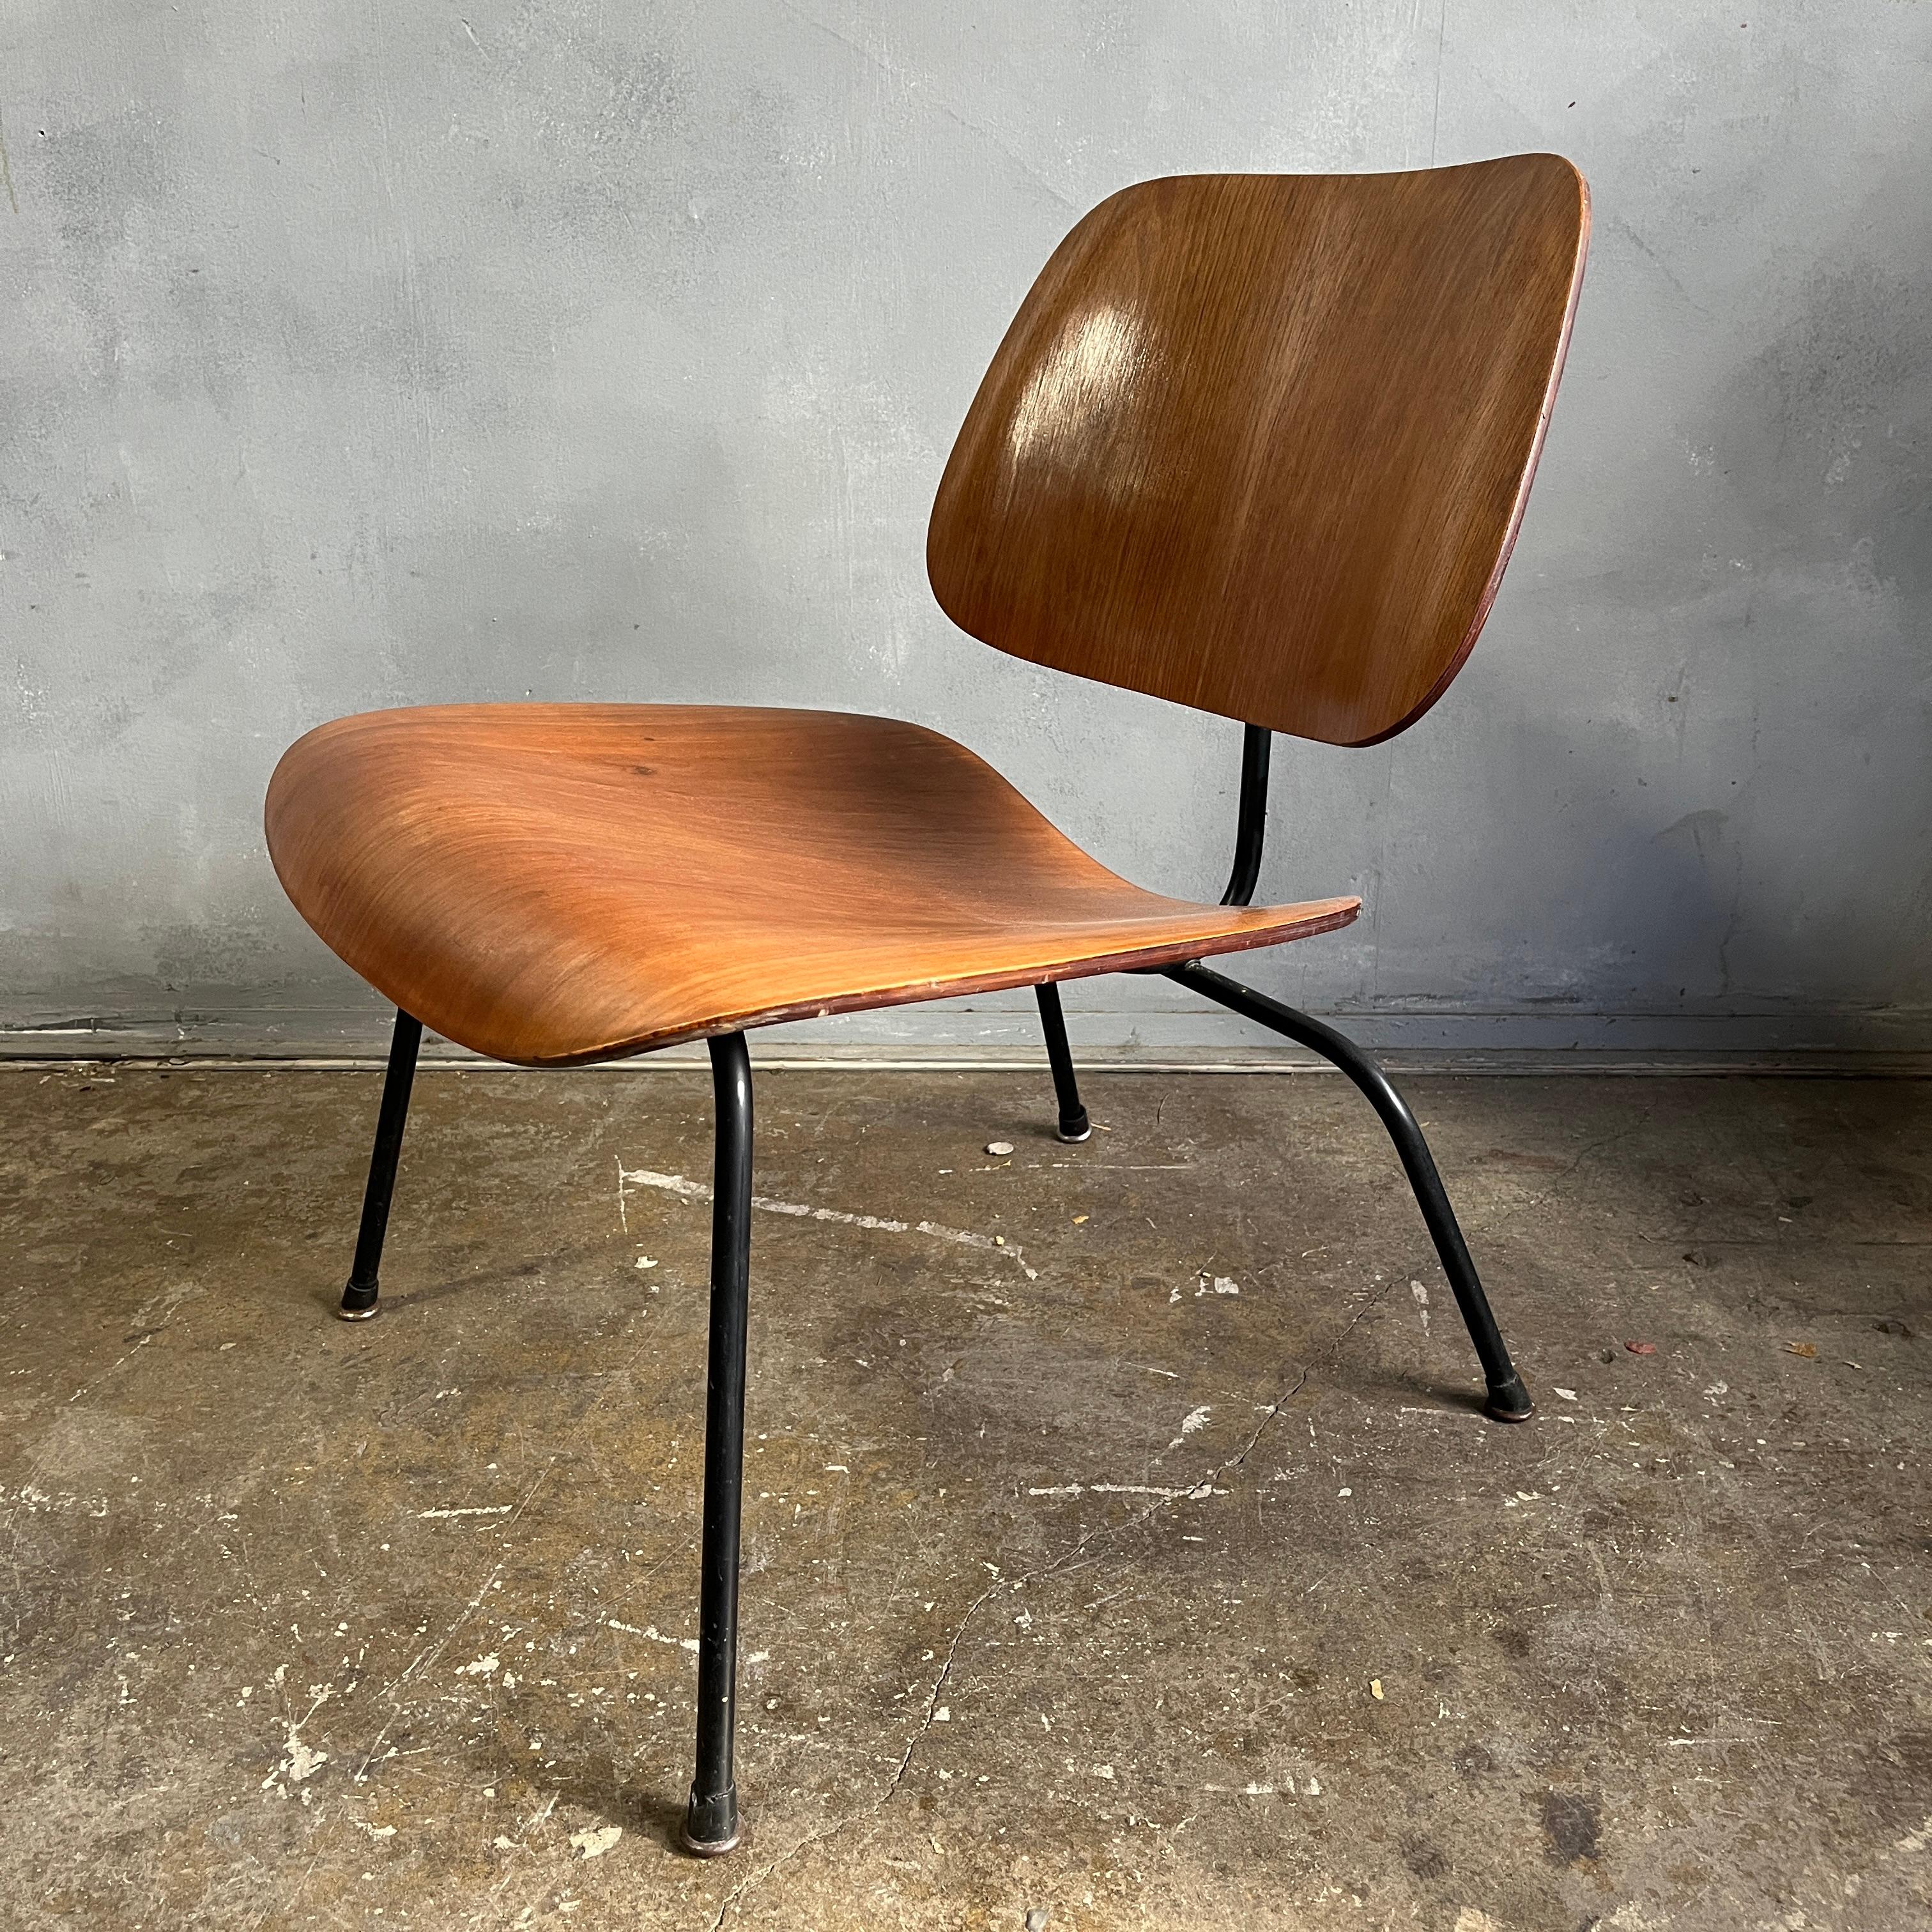 The LCM ( Lounge Chair Metal ) by Herman Miller is our favorite of the Eames plywood chair designs. The metal frame gives an overall visual lightness and makes the wood seat and back appear to float. It combines industrial materials in an original